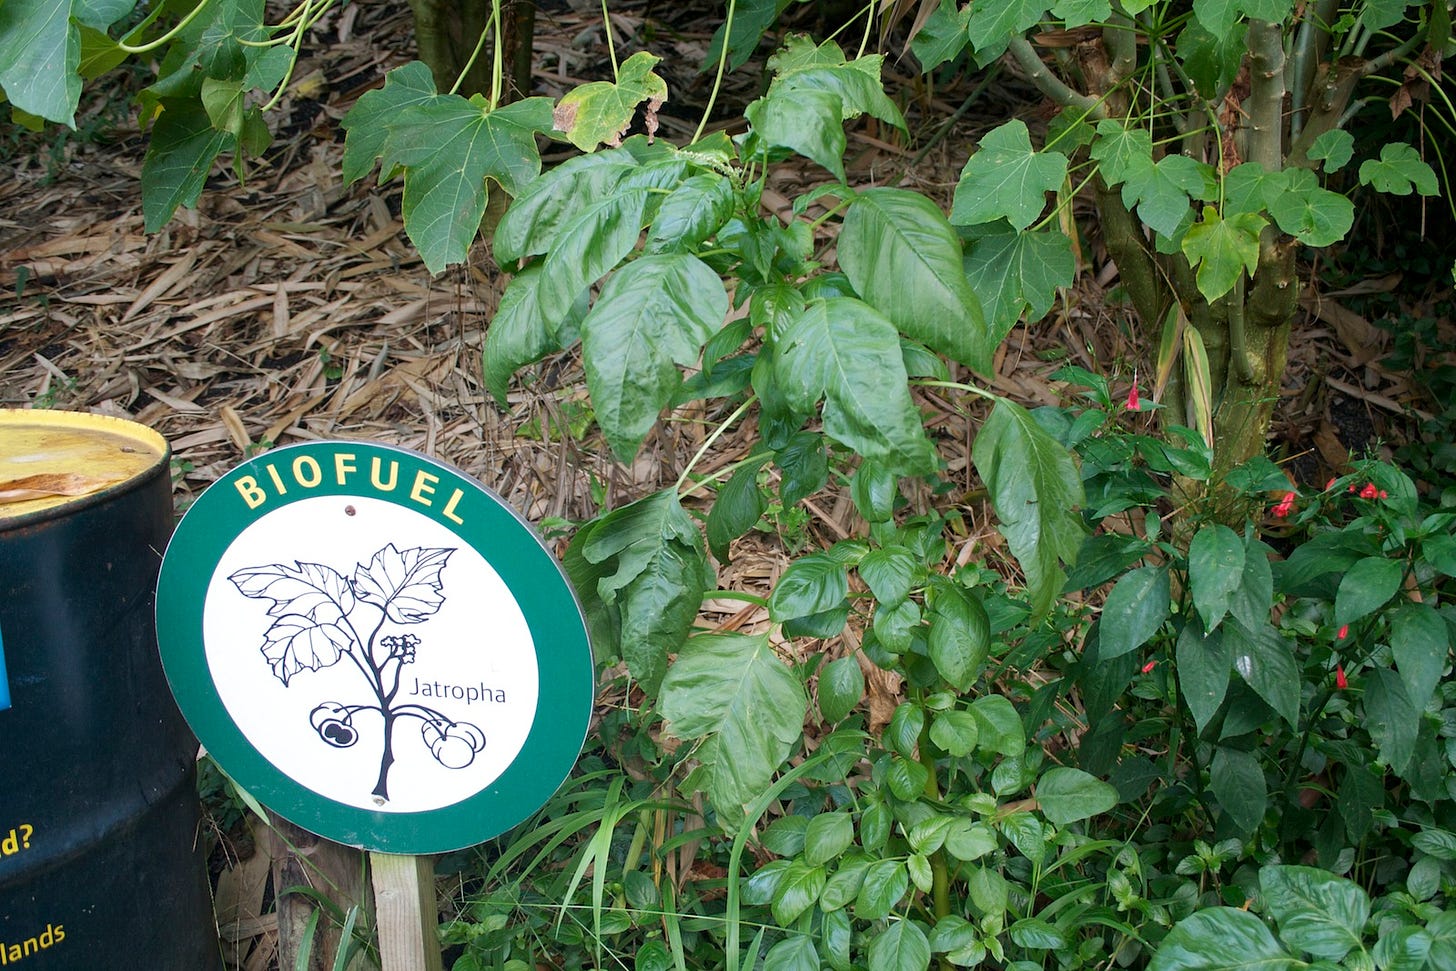 A green leafy plant rises above a forest floor scattered with long, dried leaves. In the bottom left corner, an old oil barrel stands next to a round sign proclaiming this to be Jatropha, a biofuel plant.